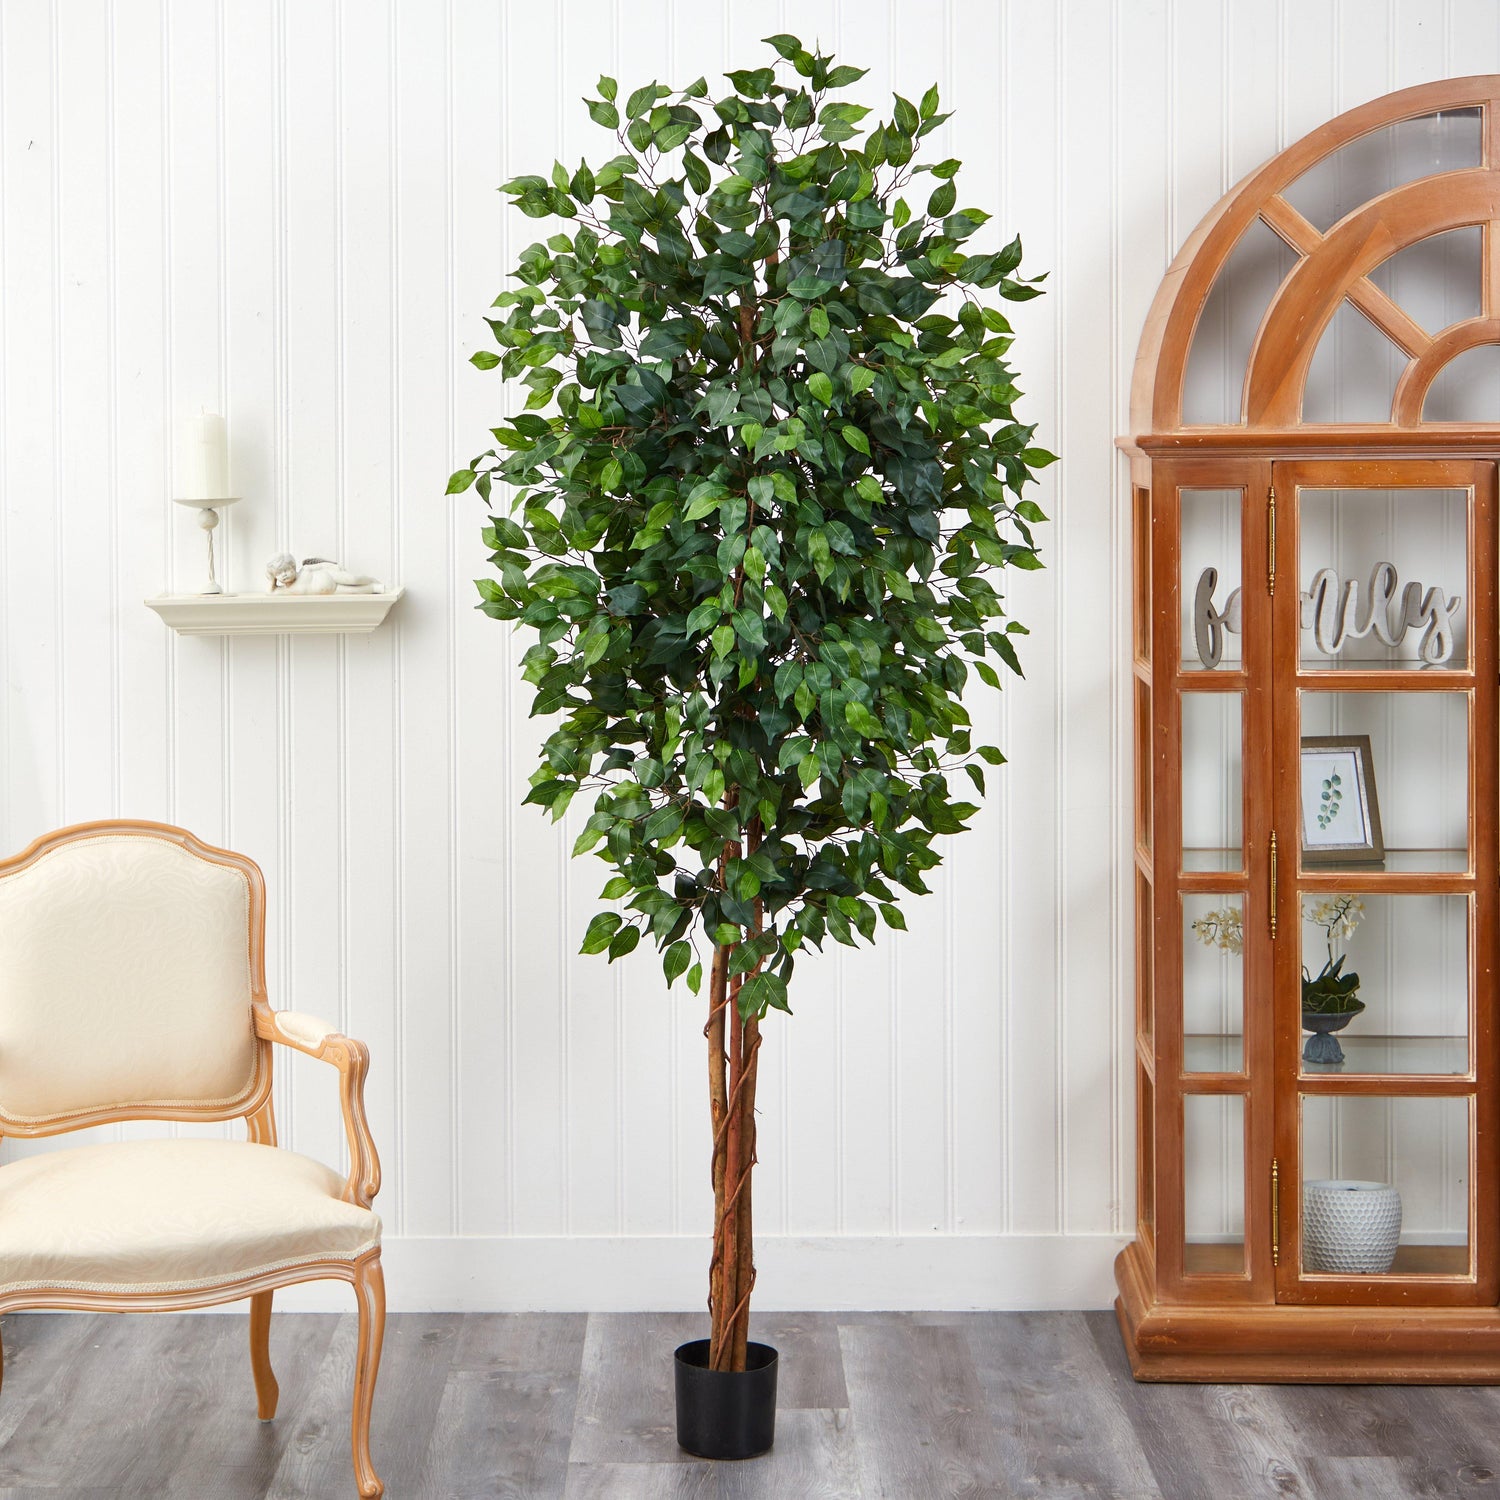 NearlyNatural Artificial 8 ft Tall Large Ficus Tree with 1500+ Leaves